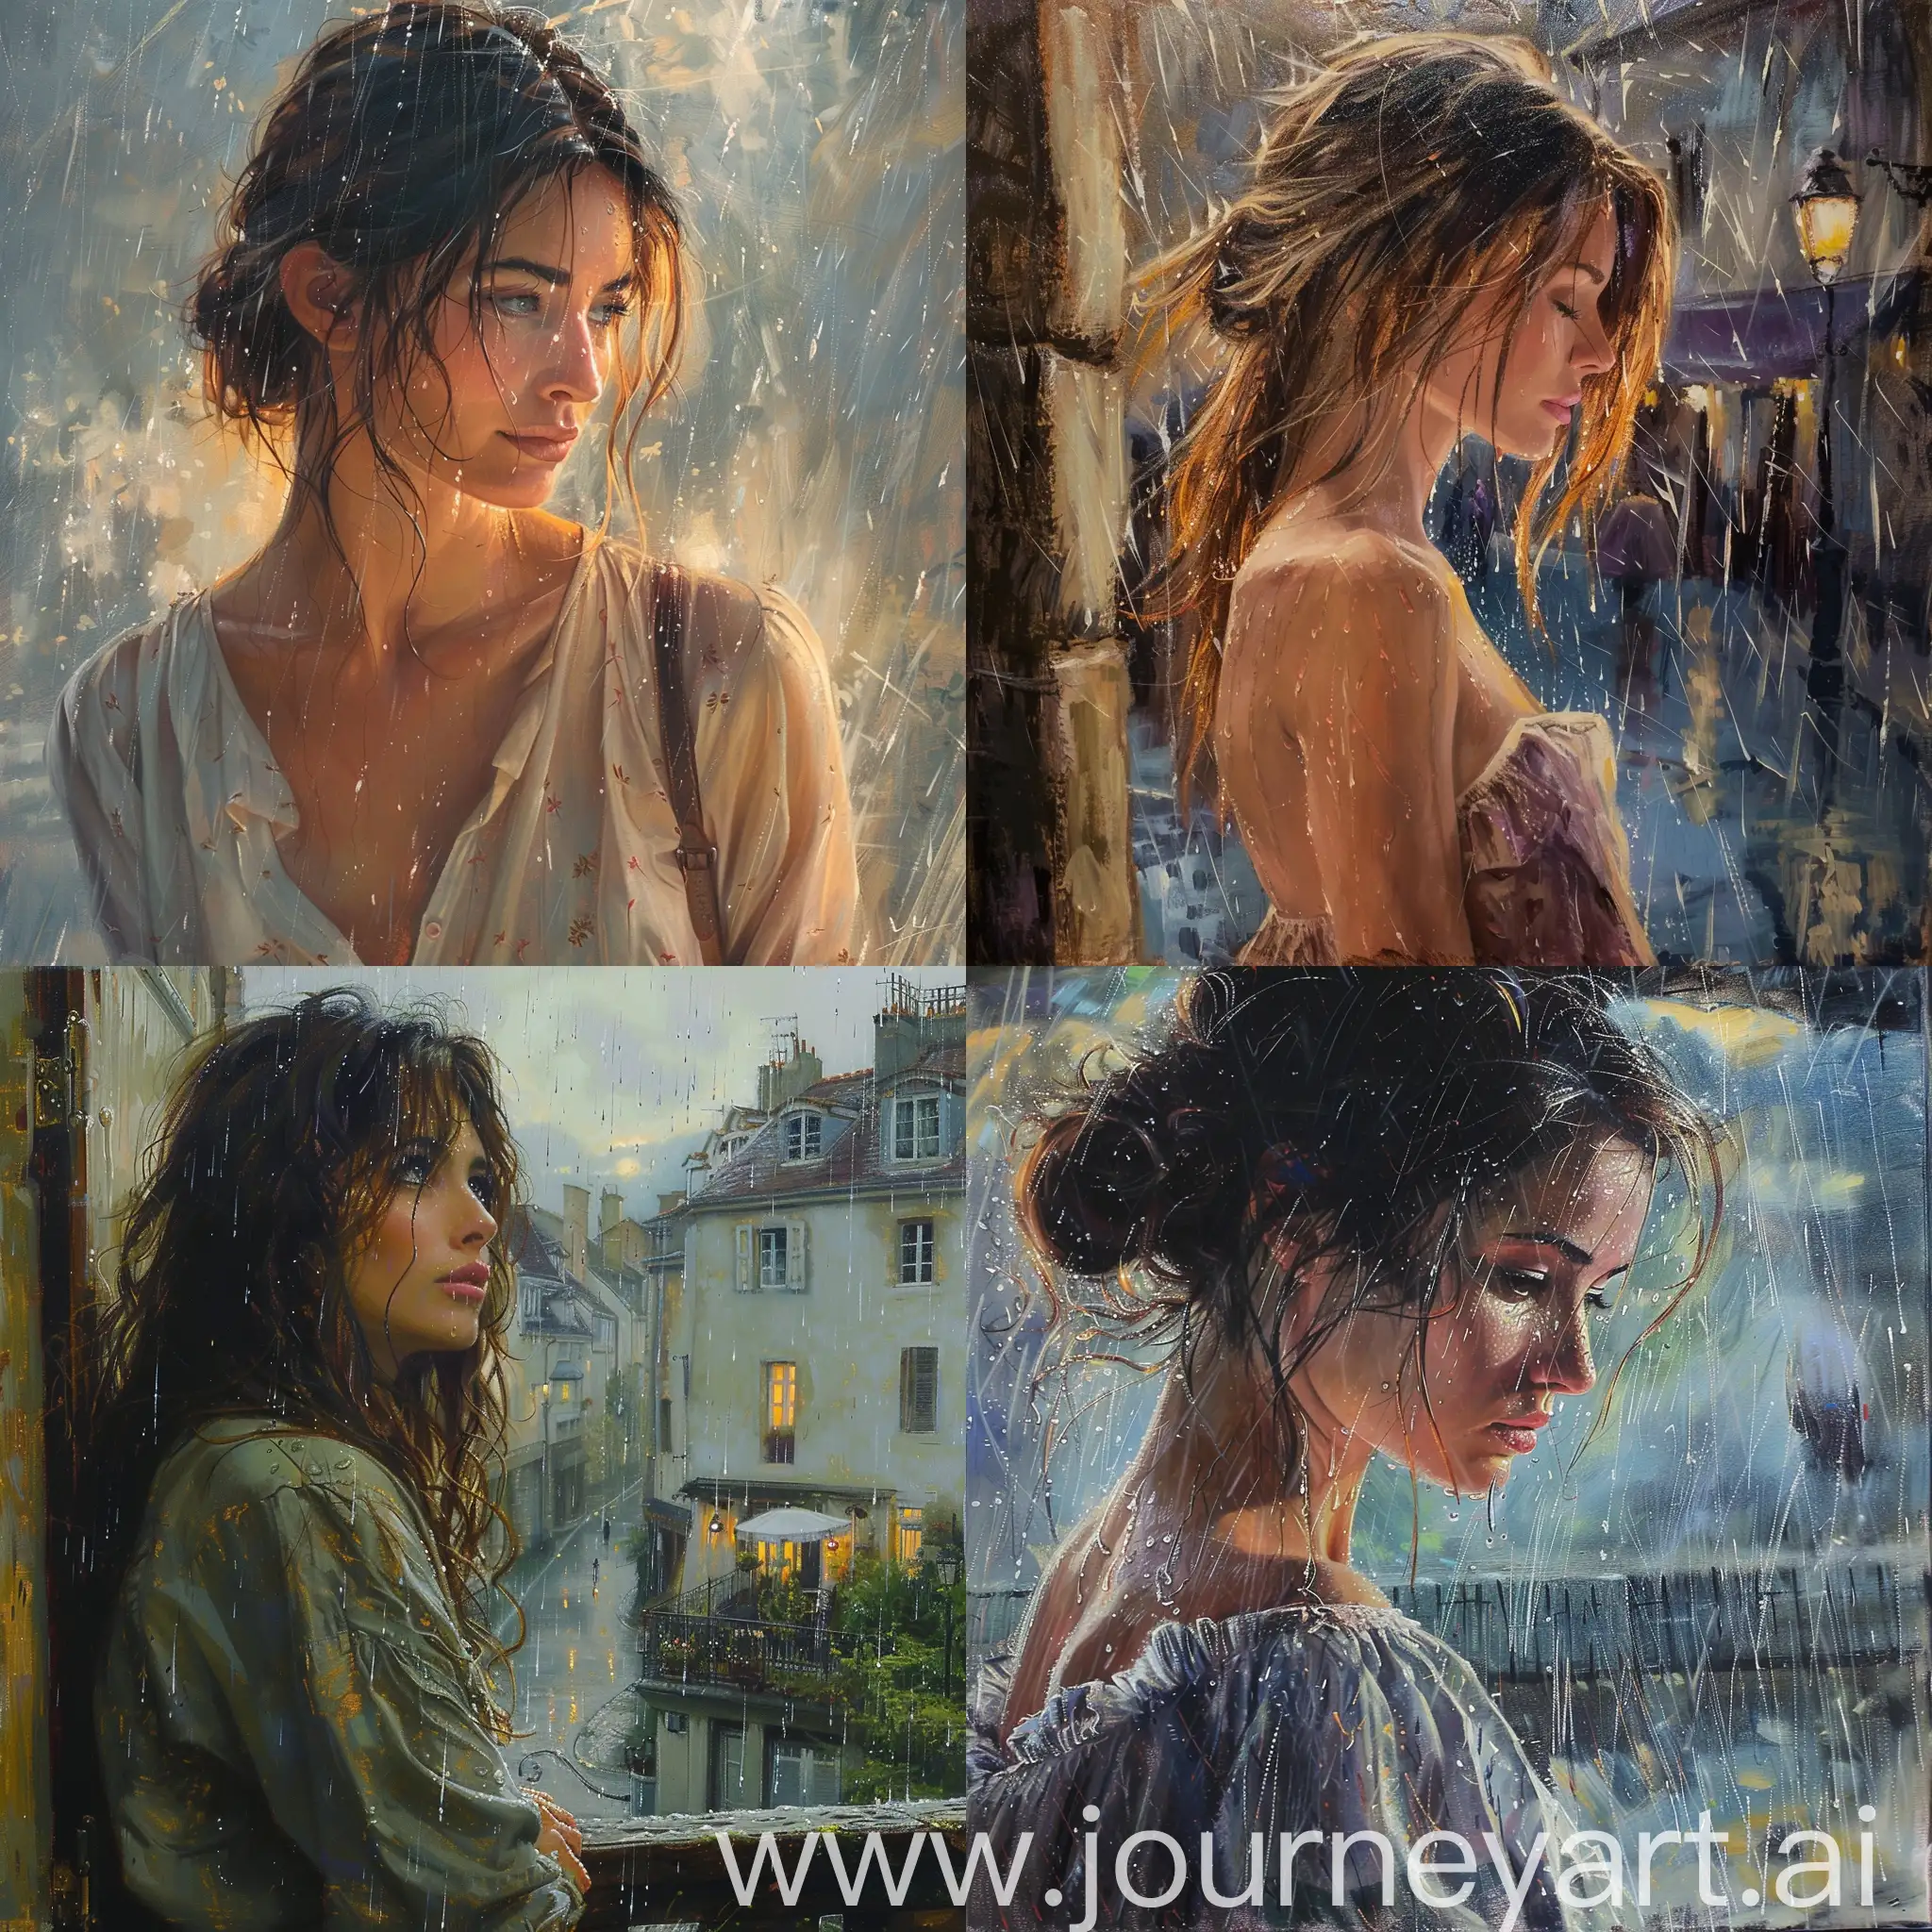 a Normandy girl in the rain, skillfully capturing the essence of the moment. Focus on realistic details, with soft and romantic lighting, The artist is encouraged to evoke both the emotions of the scene and a sense of sensuality